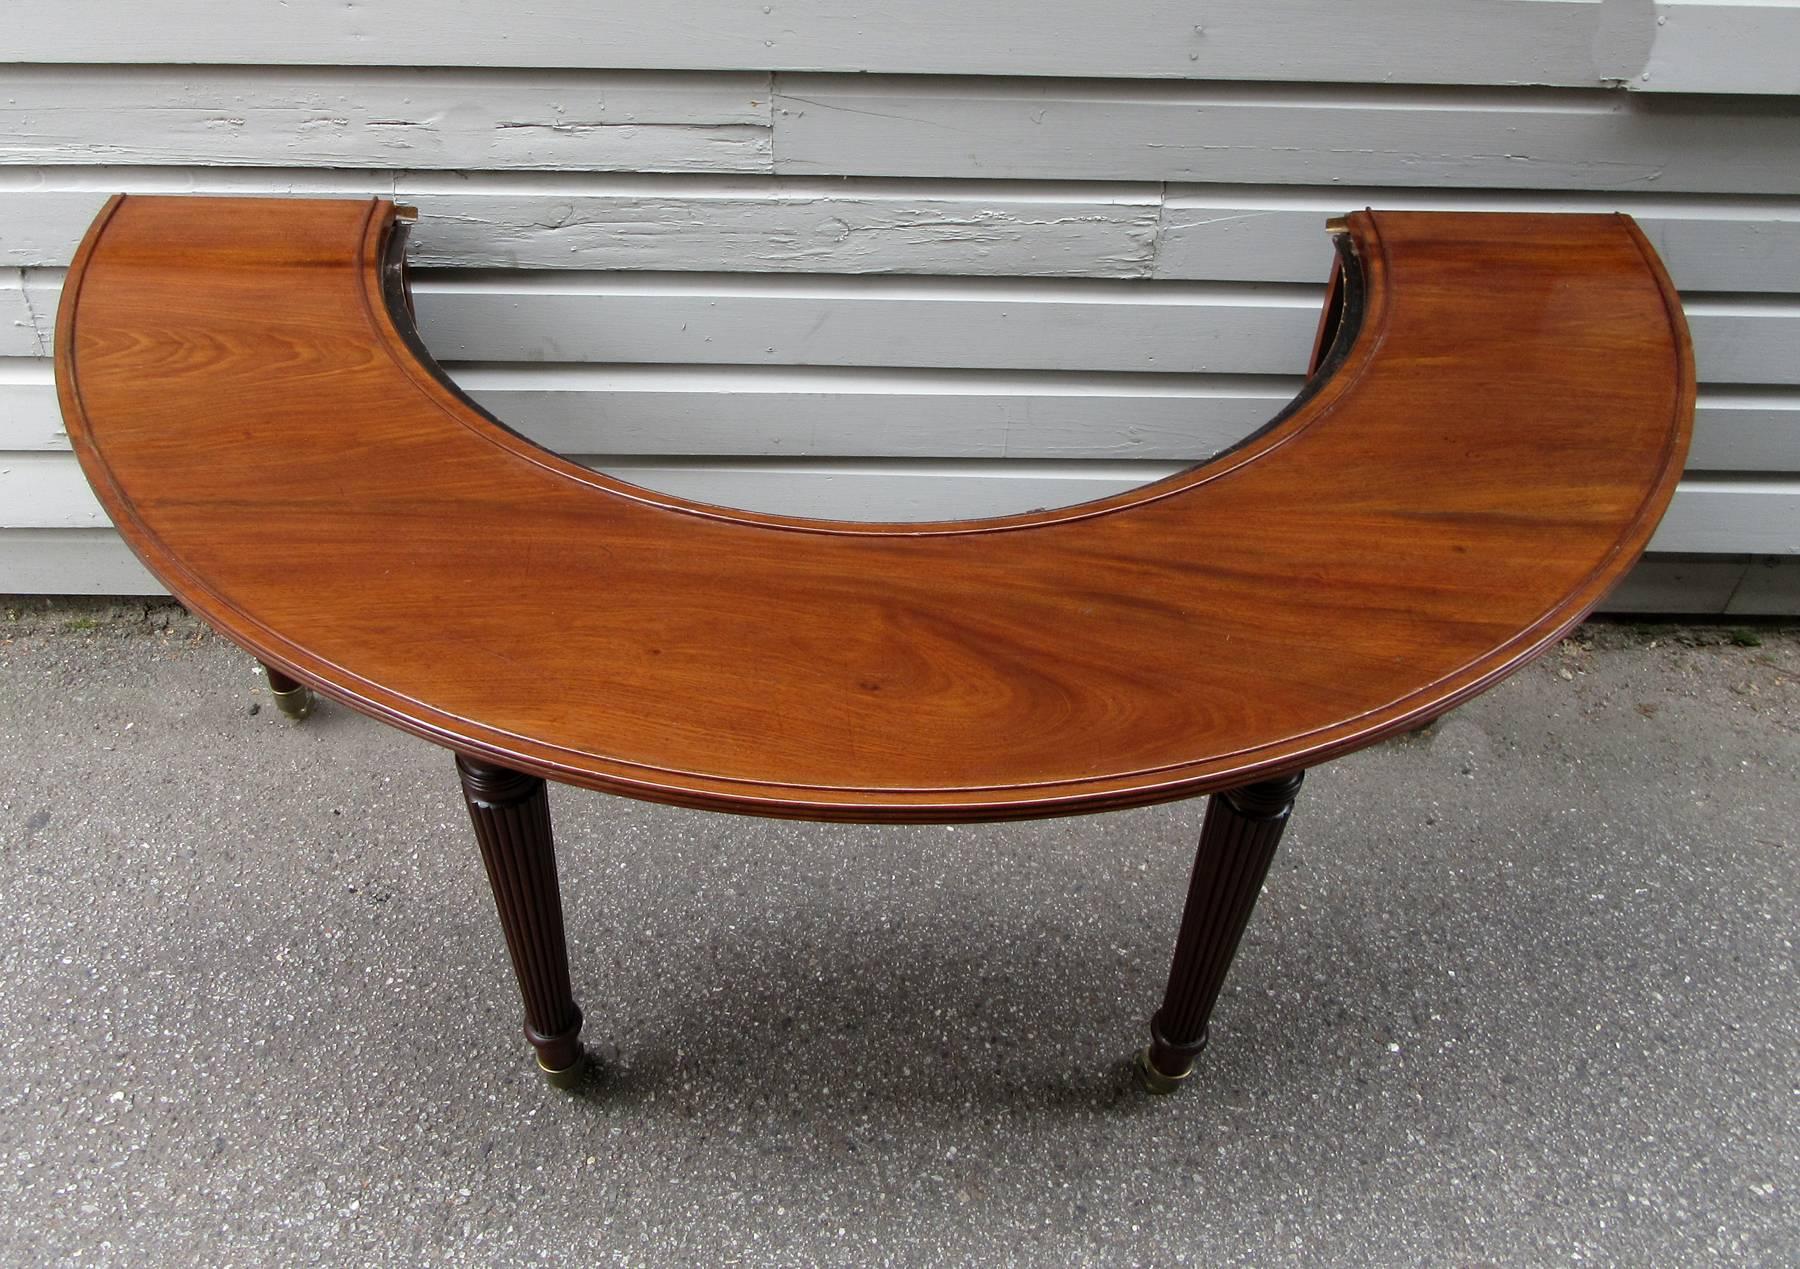 Early 19th Century English Regency Mahogany Social Table Attributed to Gillows For Sale 5